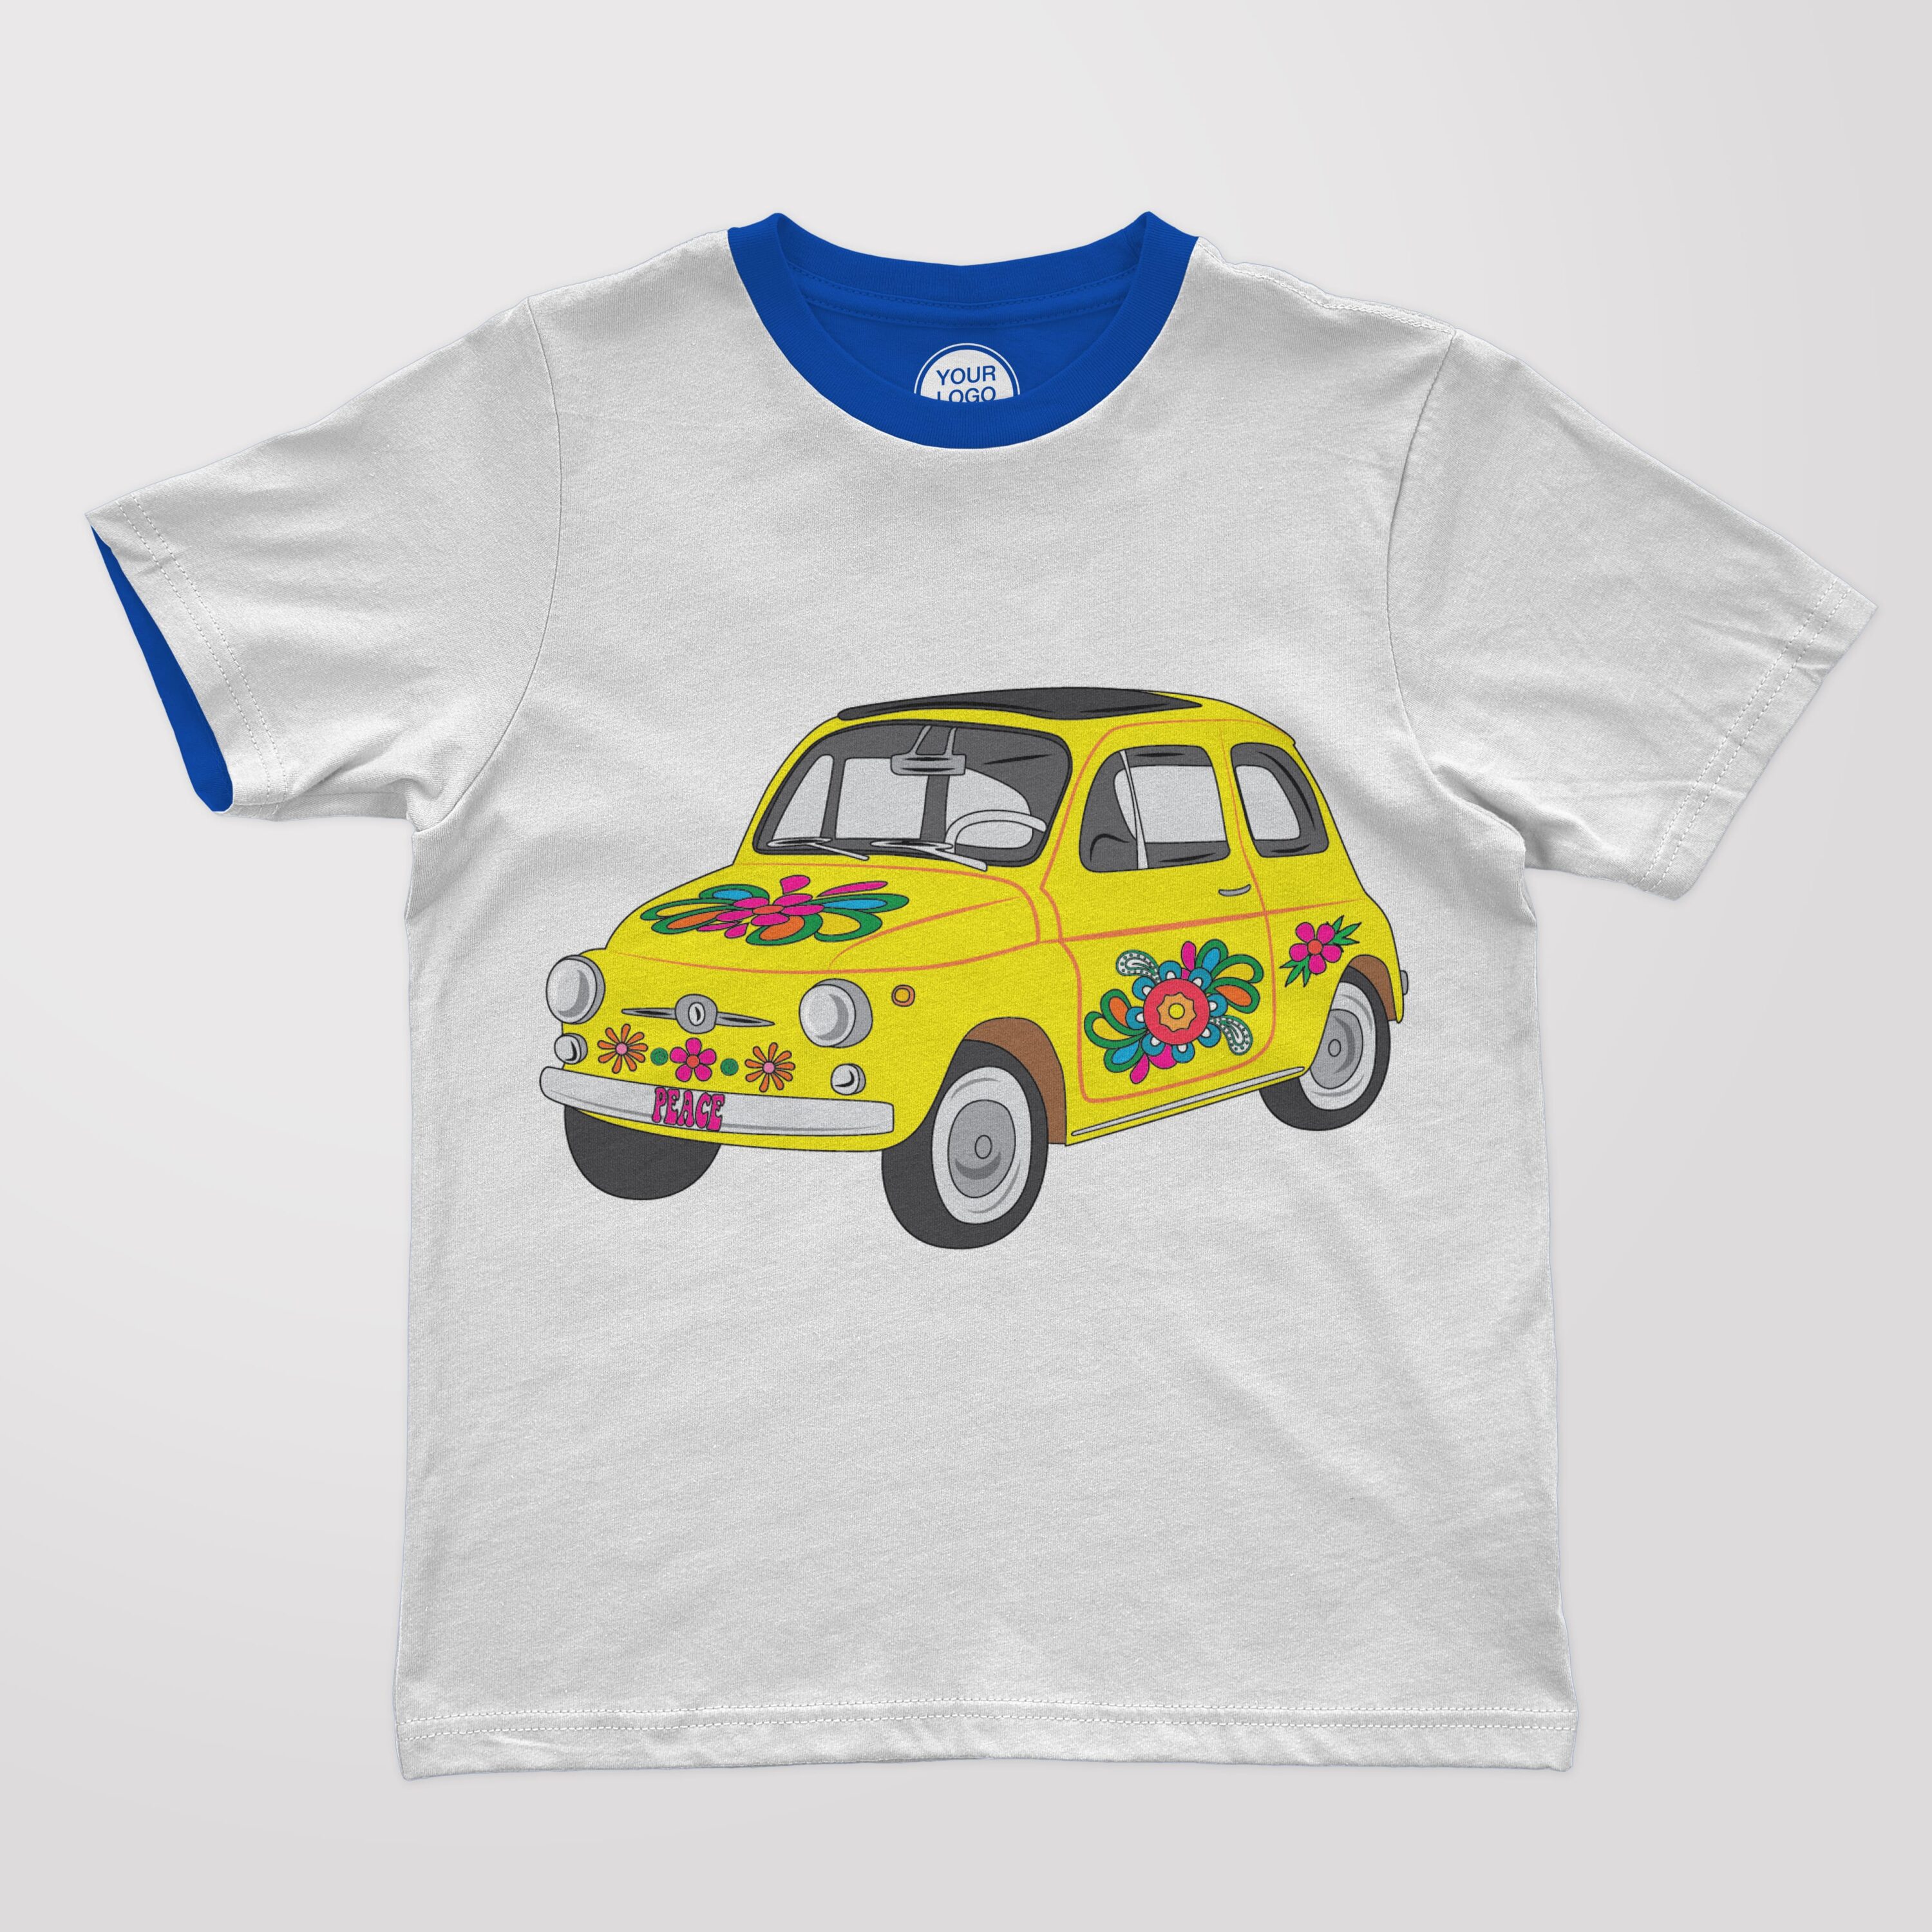 T-shirt design with printed hippie yellow car on it.